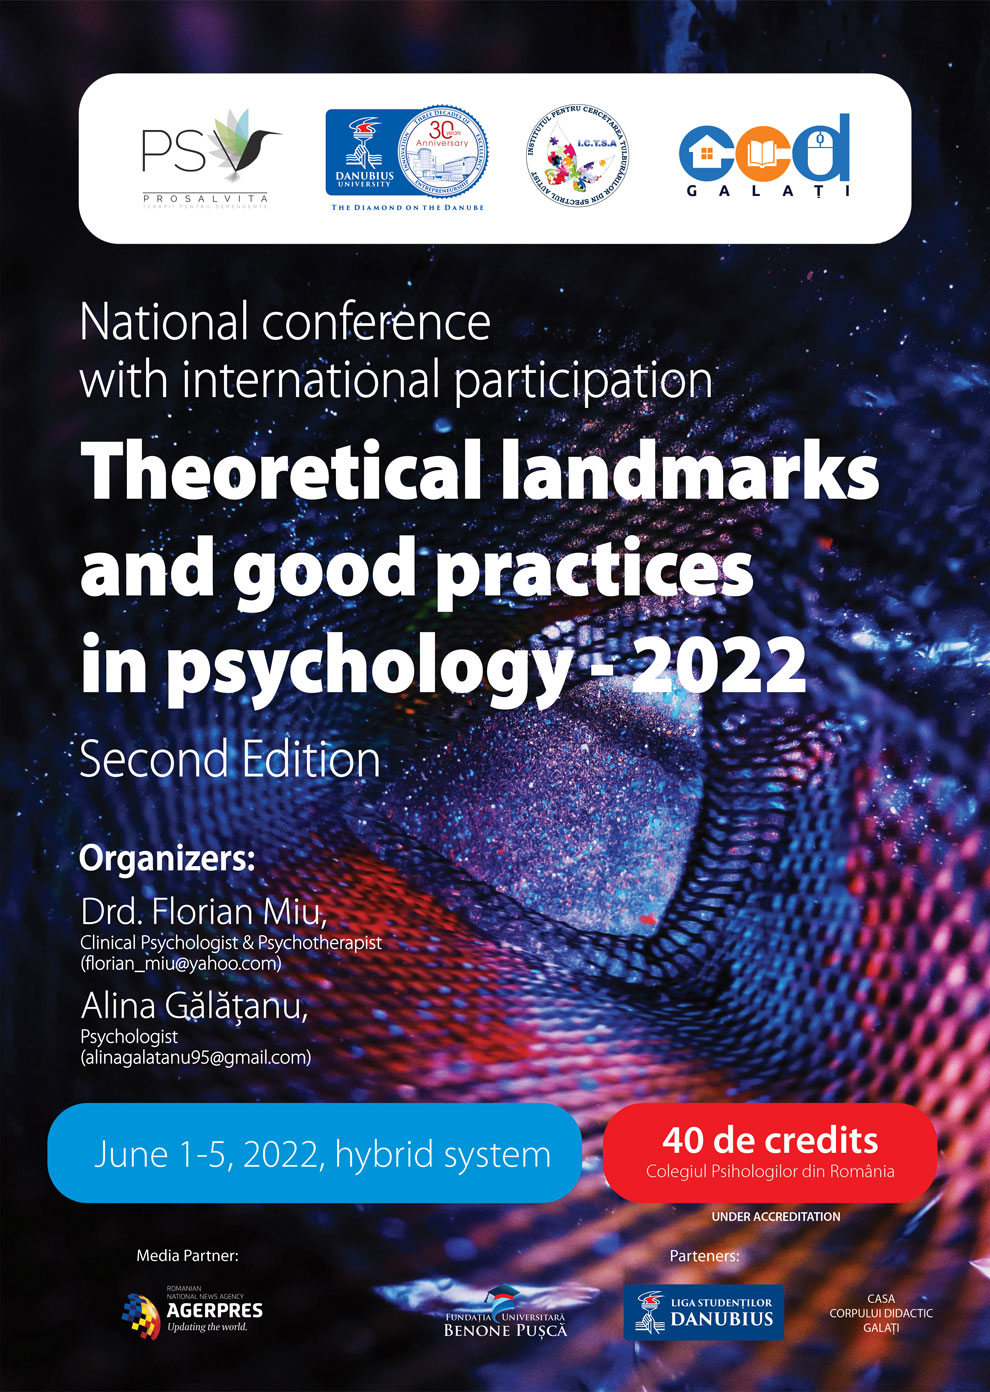 National conference with international participation “Theoretical landmarks and good practices in psychology”